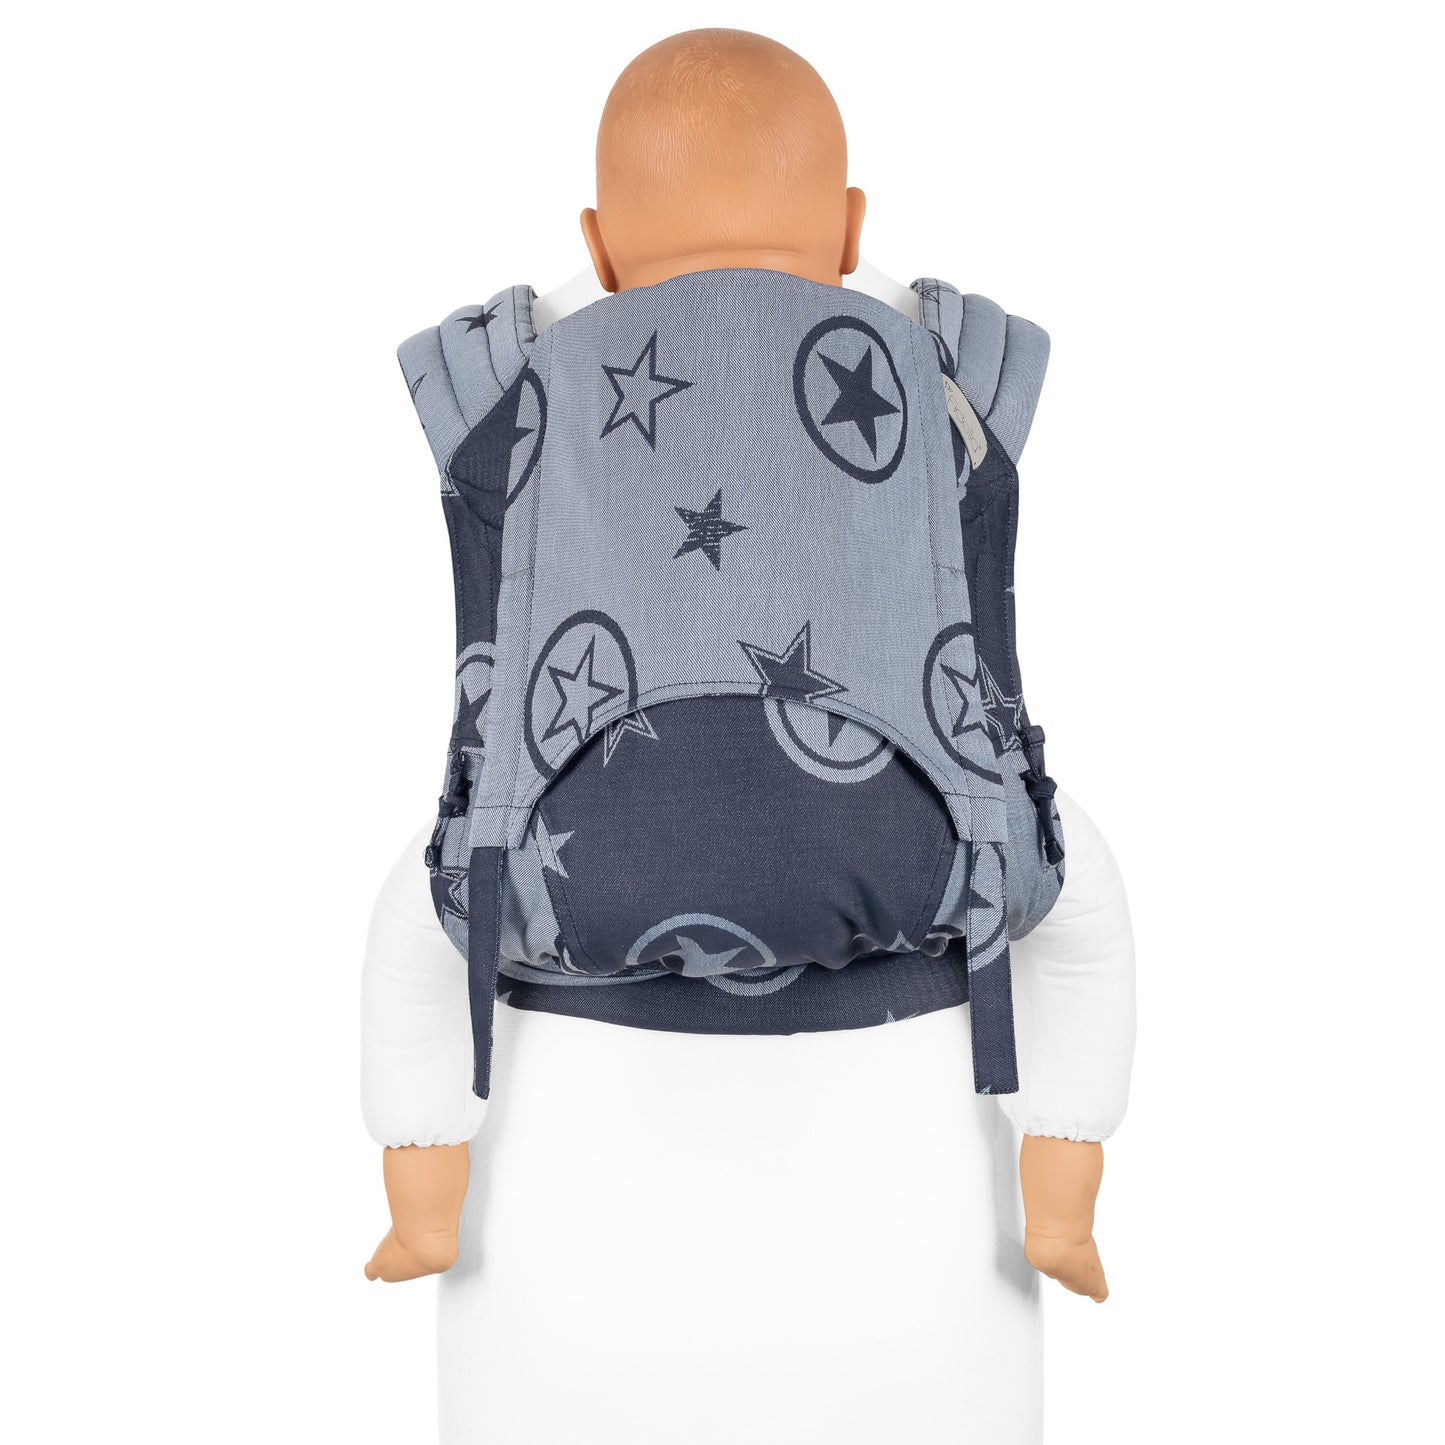 Fly Tai - Mei Tai Baby Carrier - Outer Space - blue